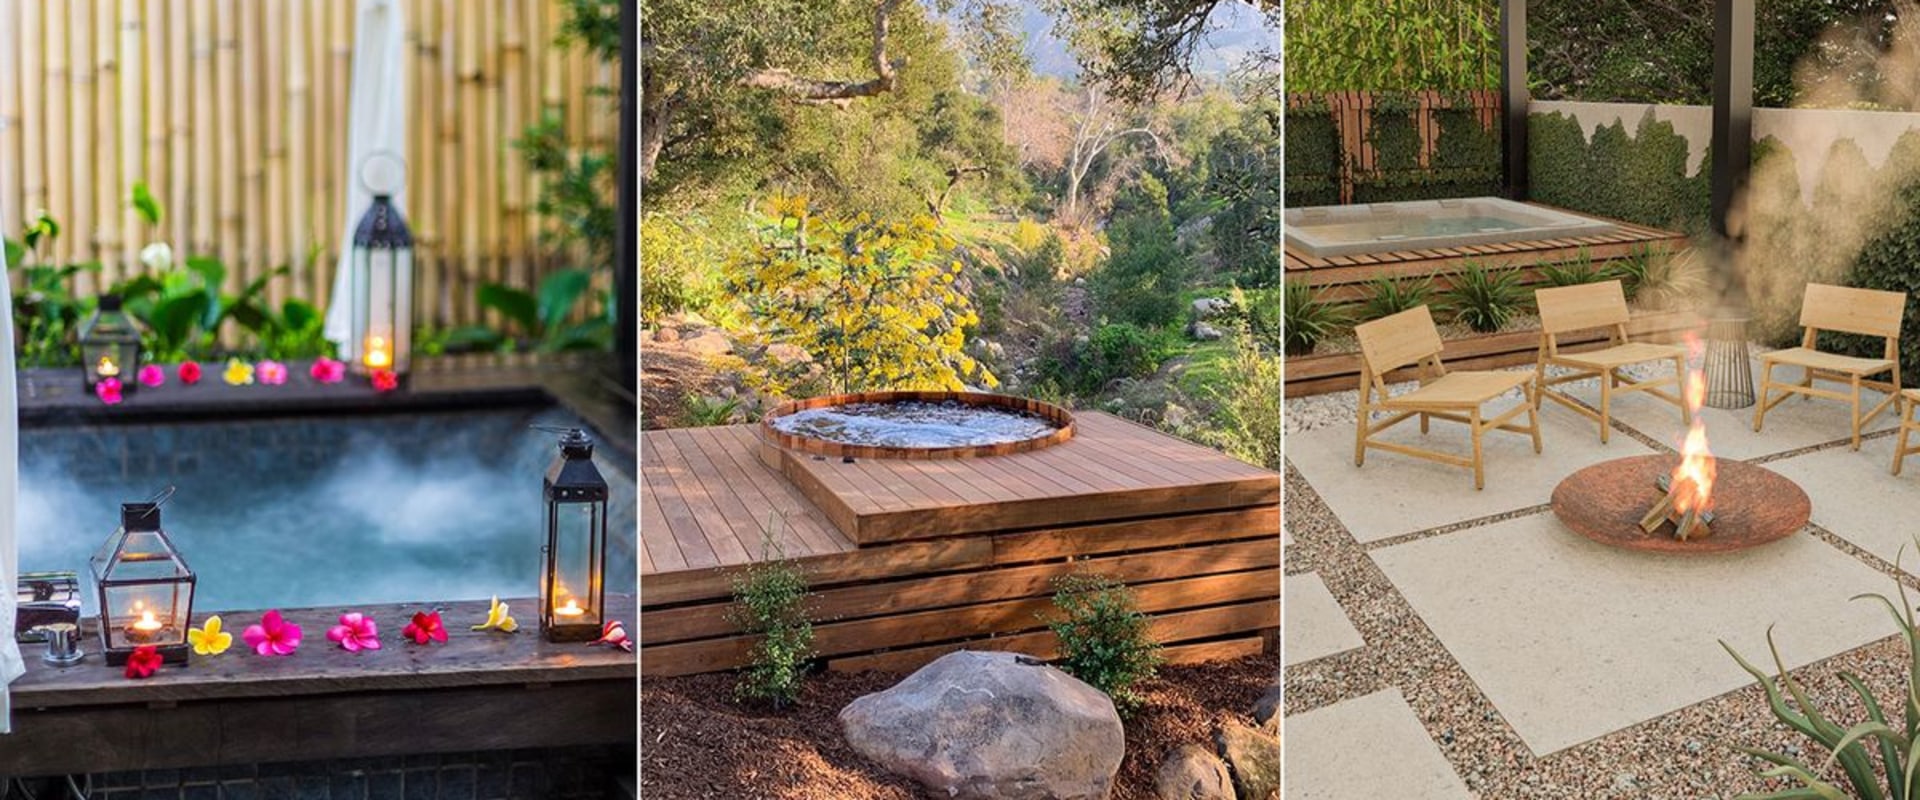 Adding a Hot Tub or Spa to Transform Your Outdoor Living Space